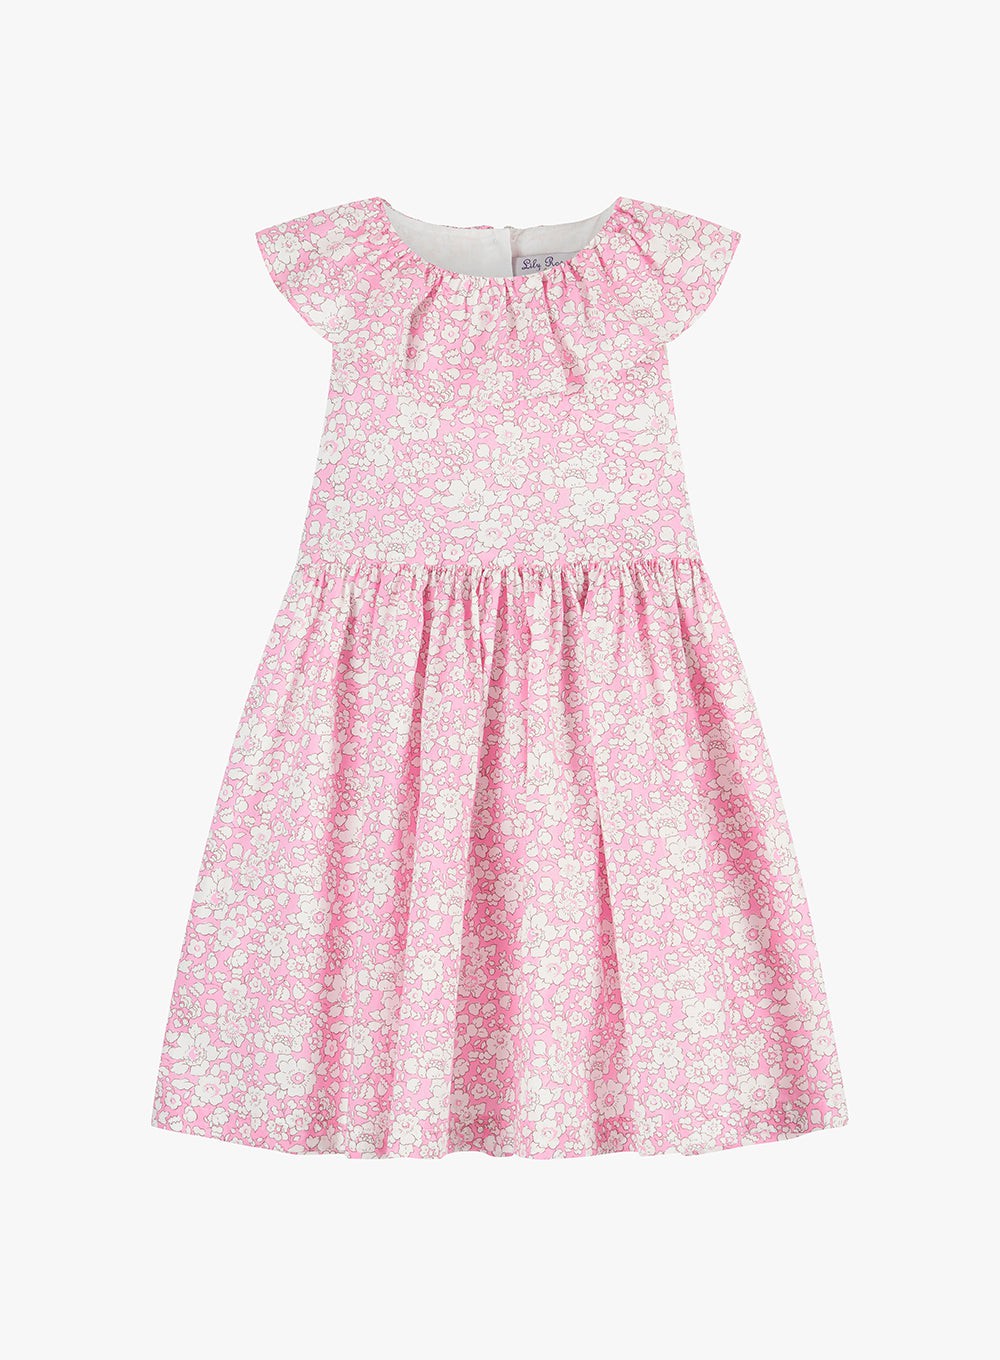 Lily Rose Girls Betsy Boo Willow Sun Dress in Pink Betsy Boo | Trotters ...